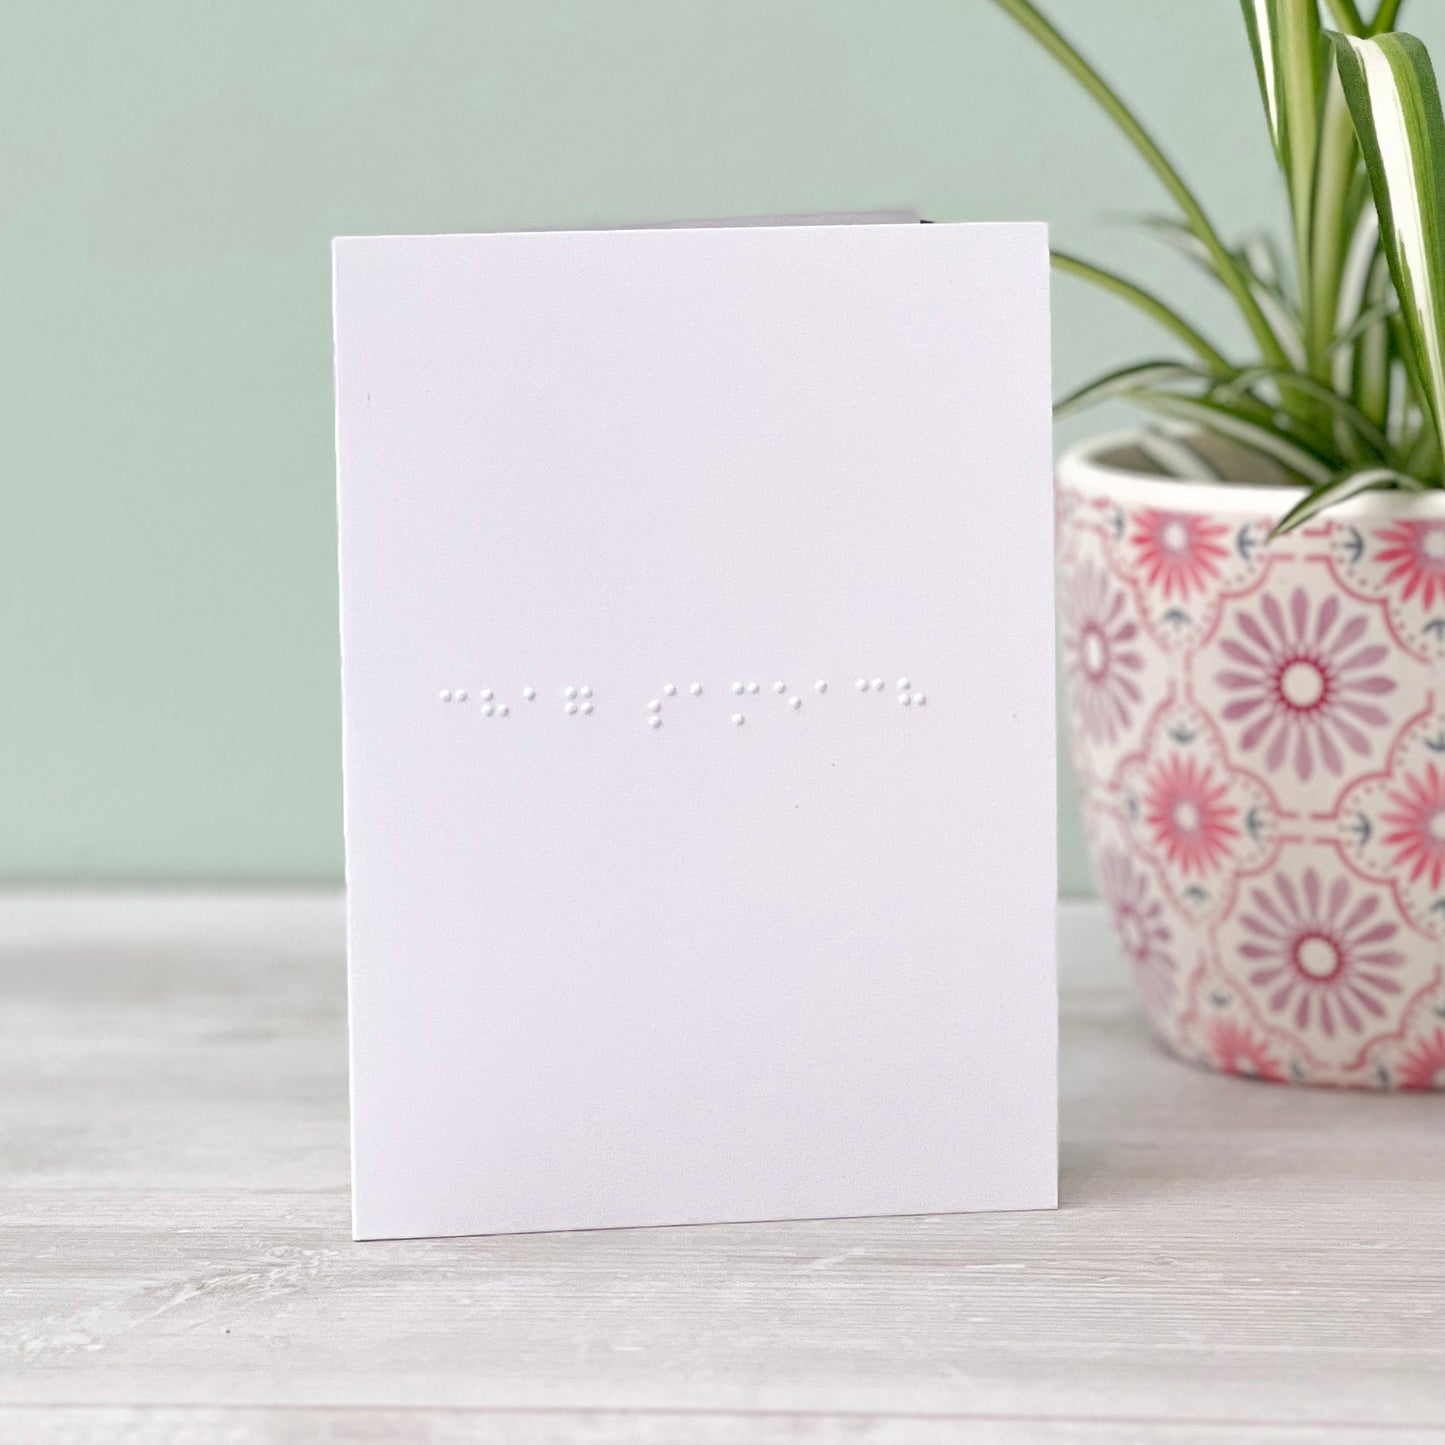 A white greetings card with chag sameach written in grade 1 braille. There is a plant to the right of the photo.